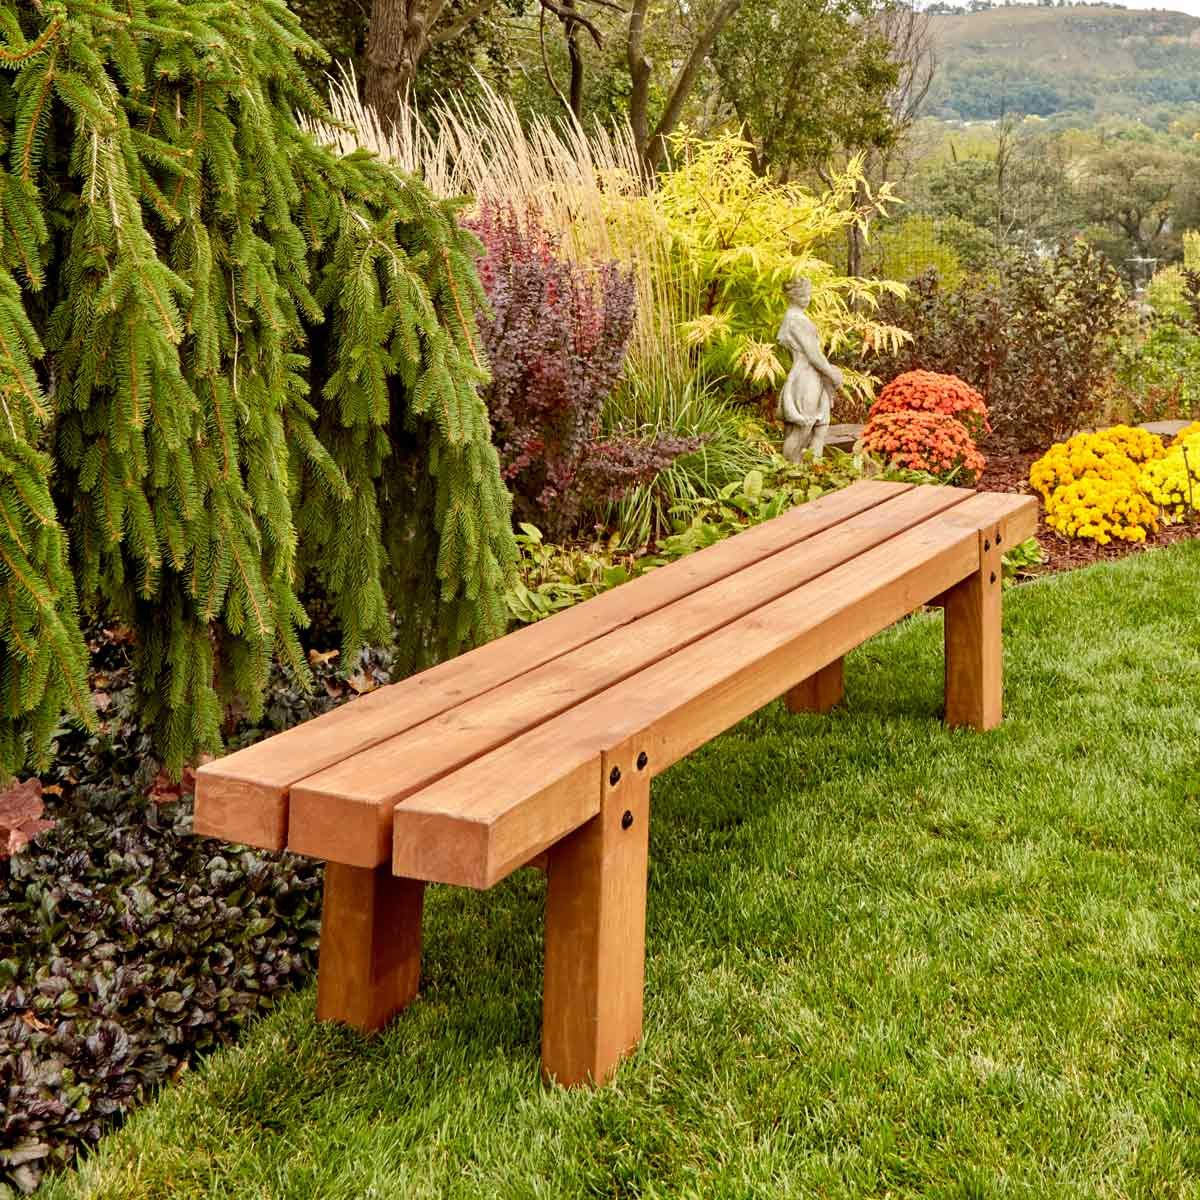 39 Outdoor Woodworking Projects for Beginners